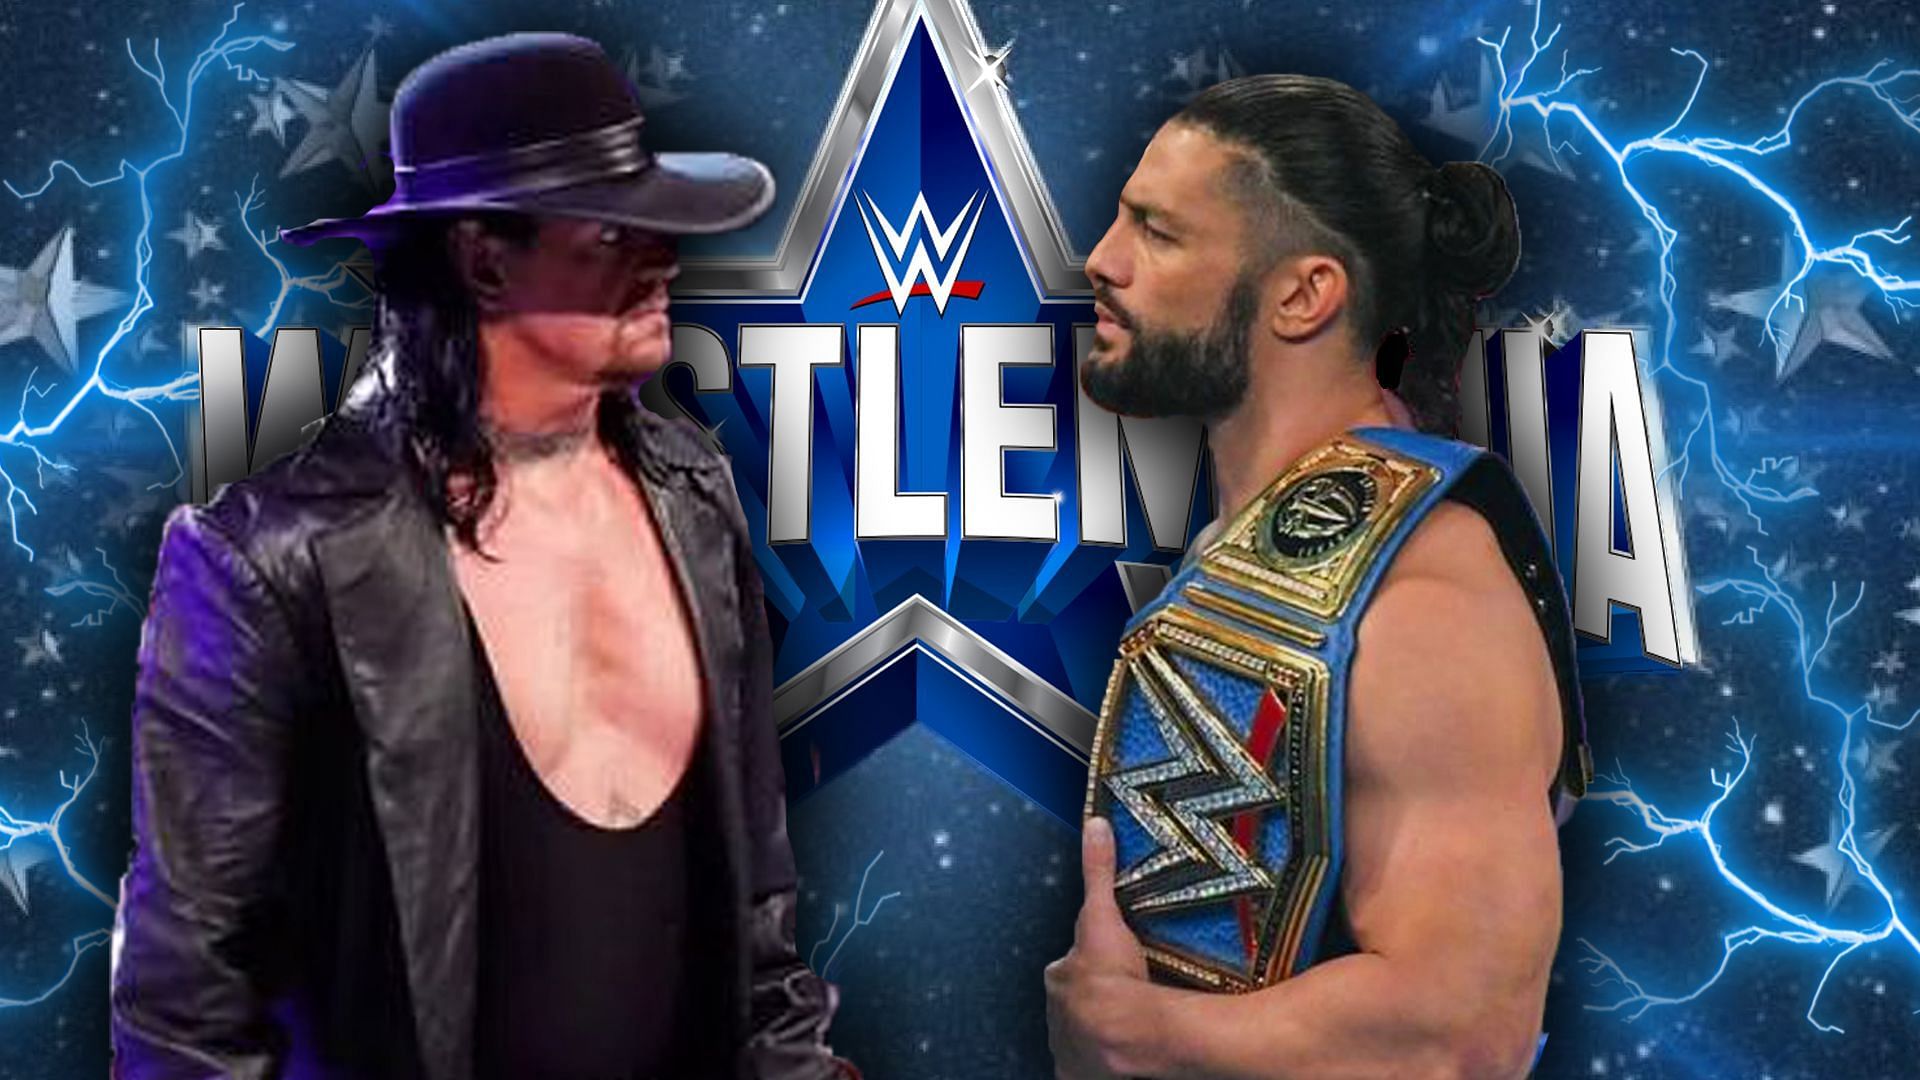 The Undertaker and Roman Reigns may come face-to-face at WrestleMania 38.